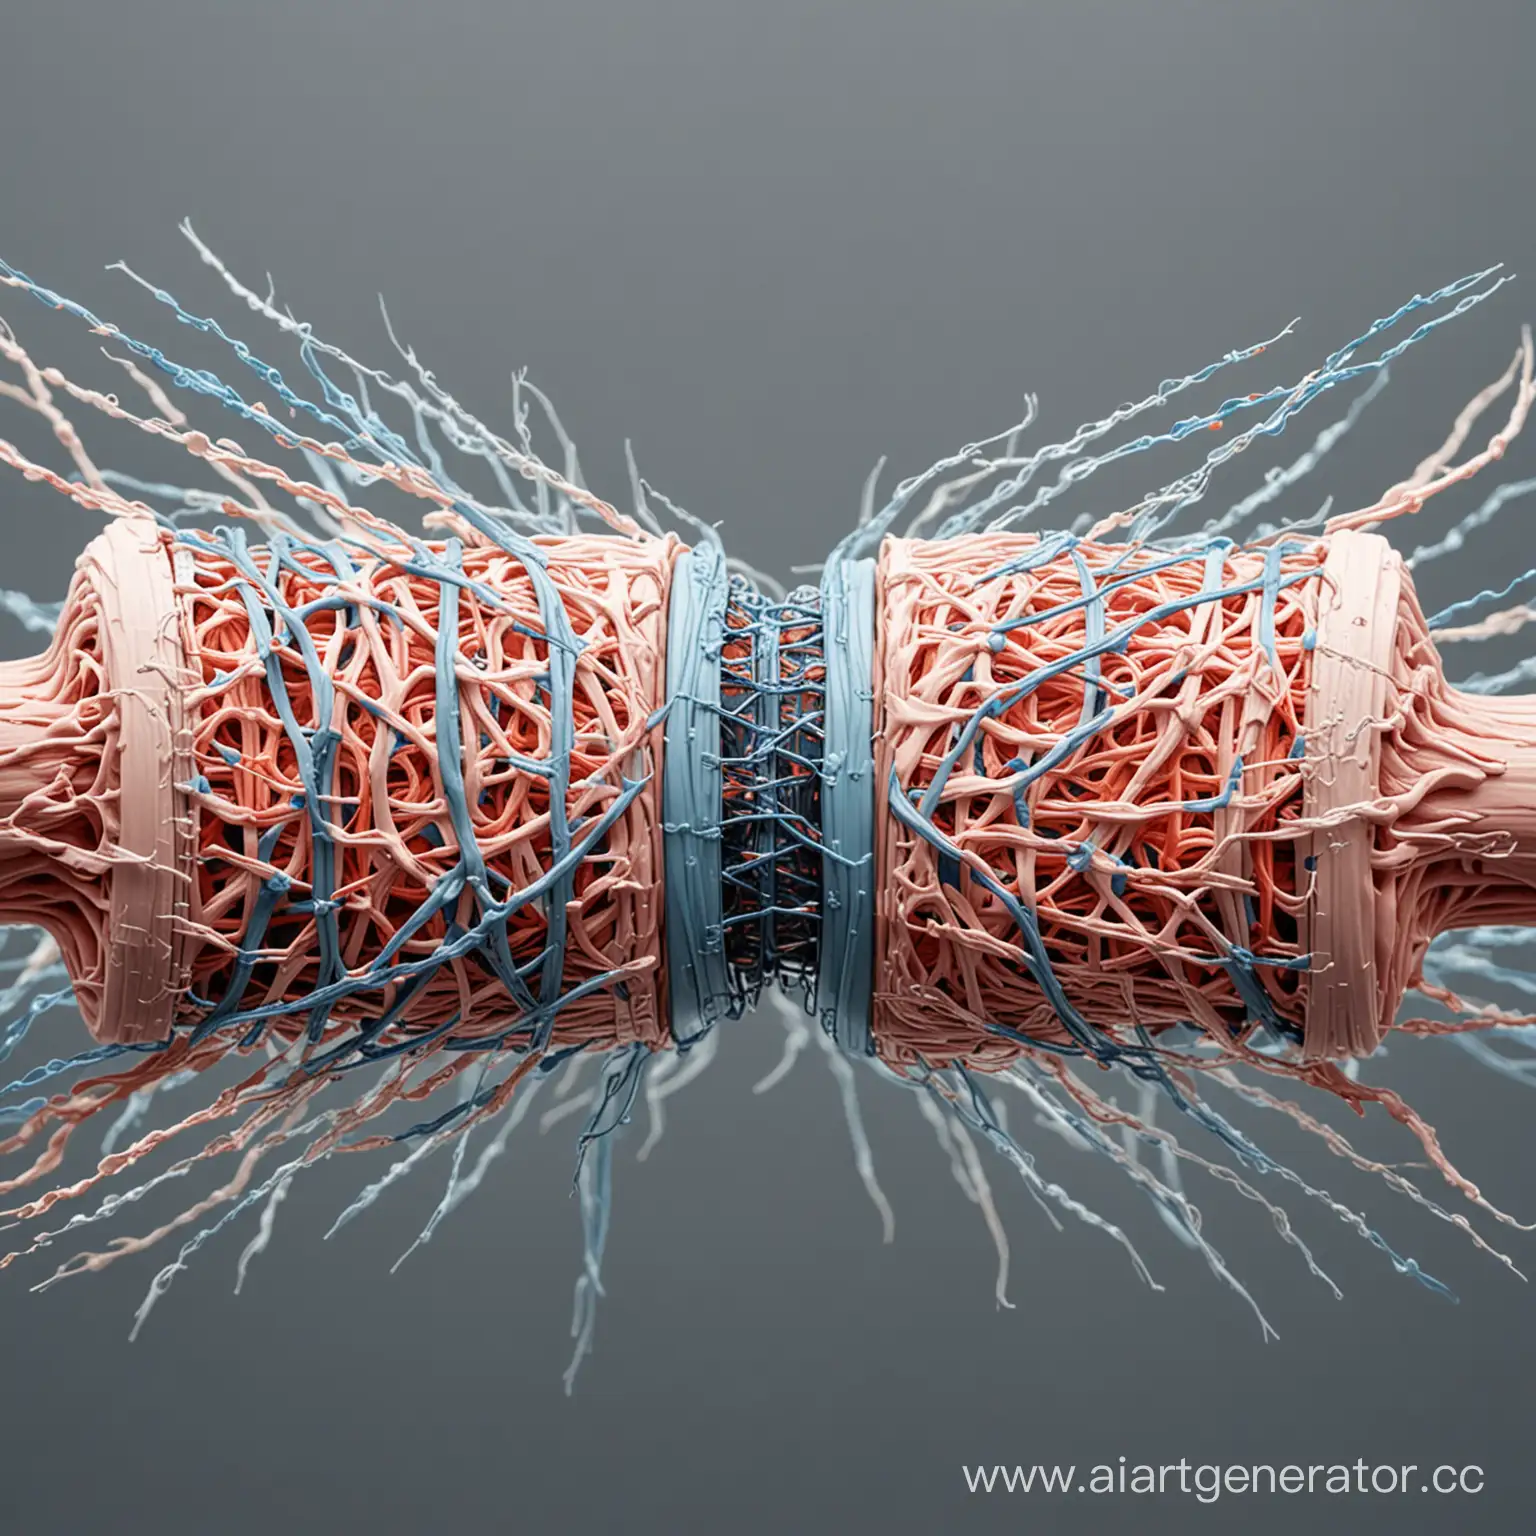 neuromechanical muscles, device, principle of operation, neural connections in muscle tissues, polymer coatings, electromagnetic principle of movement of muscle layers